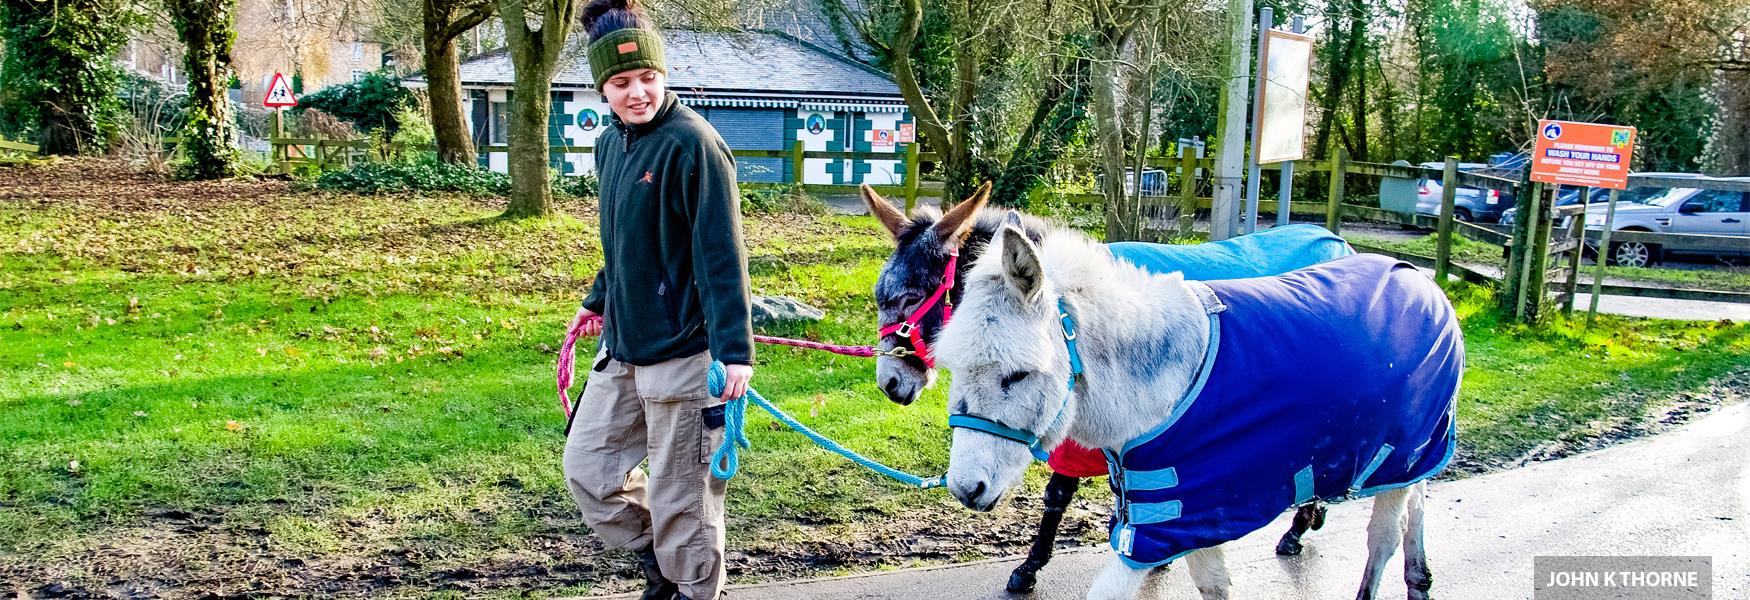 Kent Life Heritage Farm Park is a great day out for a family with lots to do all year round. The friendly animals are a joy and love seeing the visitors. Here are the donkeys in their winter coats.